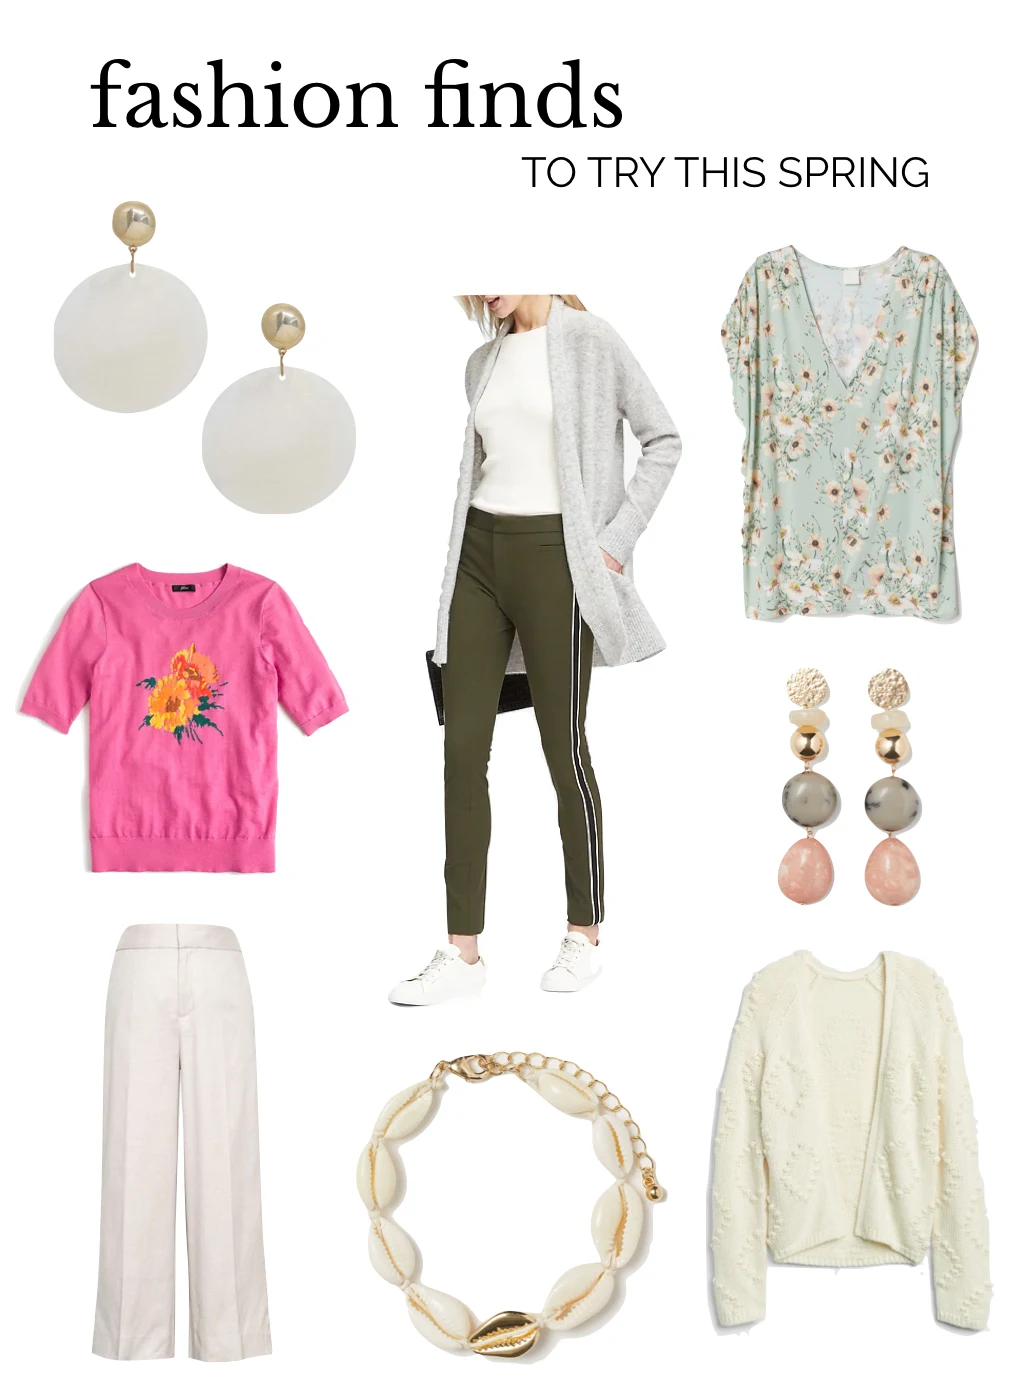 spring fashion 2019, new pant shapes, shell jewellry, floral fashion